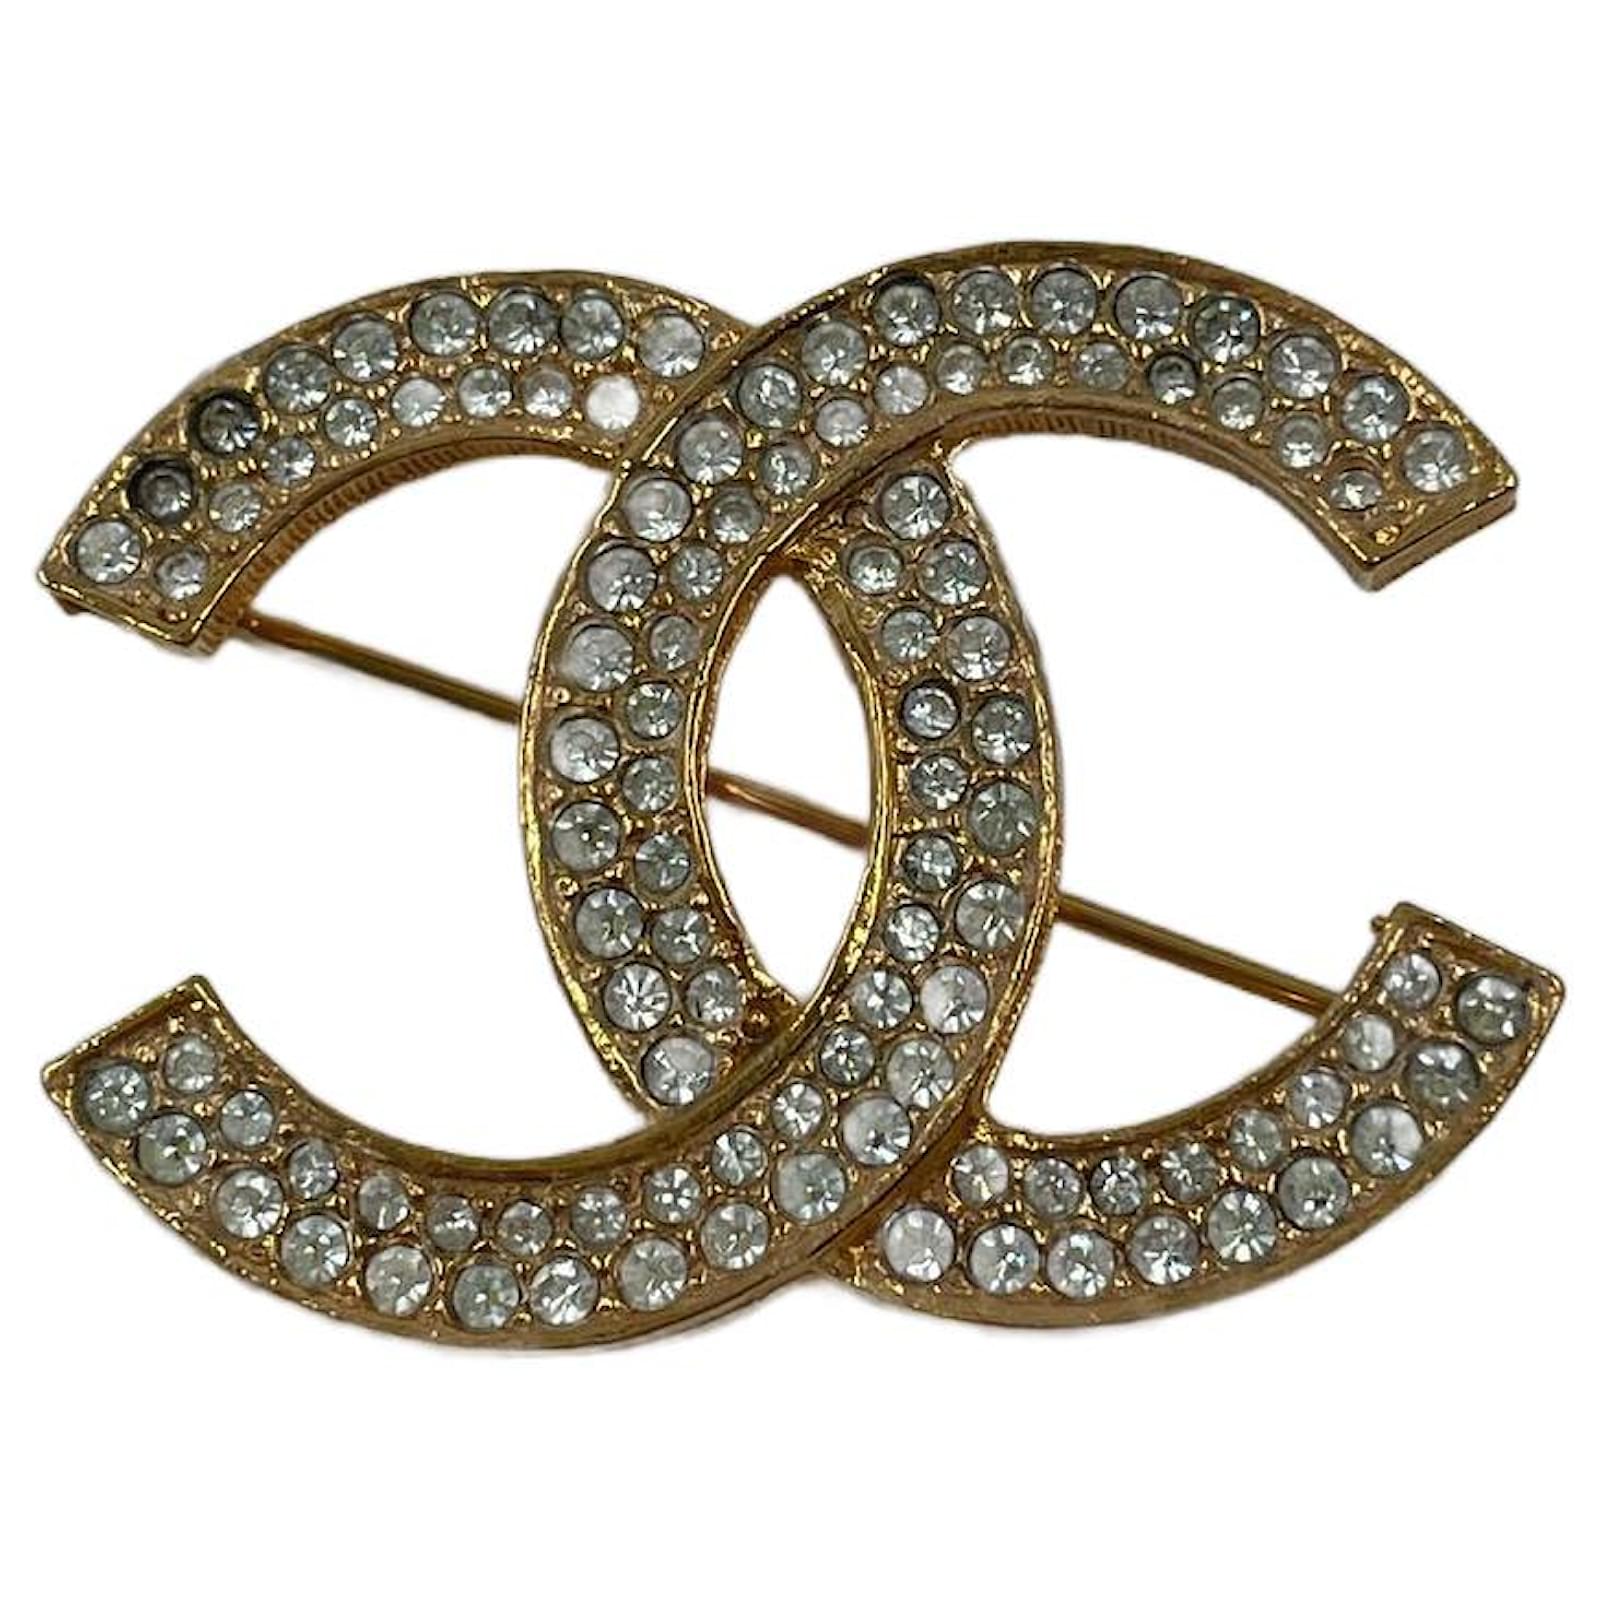 Chanel 2018 Faux Pearl & Resin CC Brooch - Gold-Tone Metal Pin